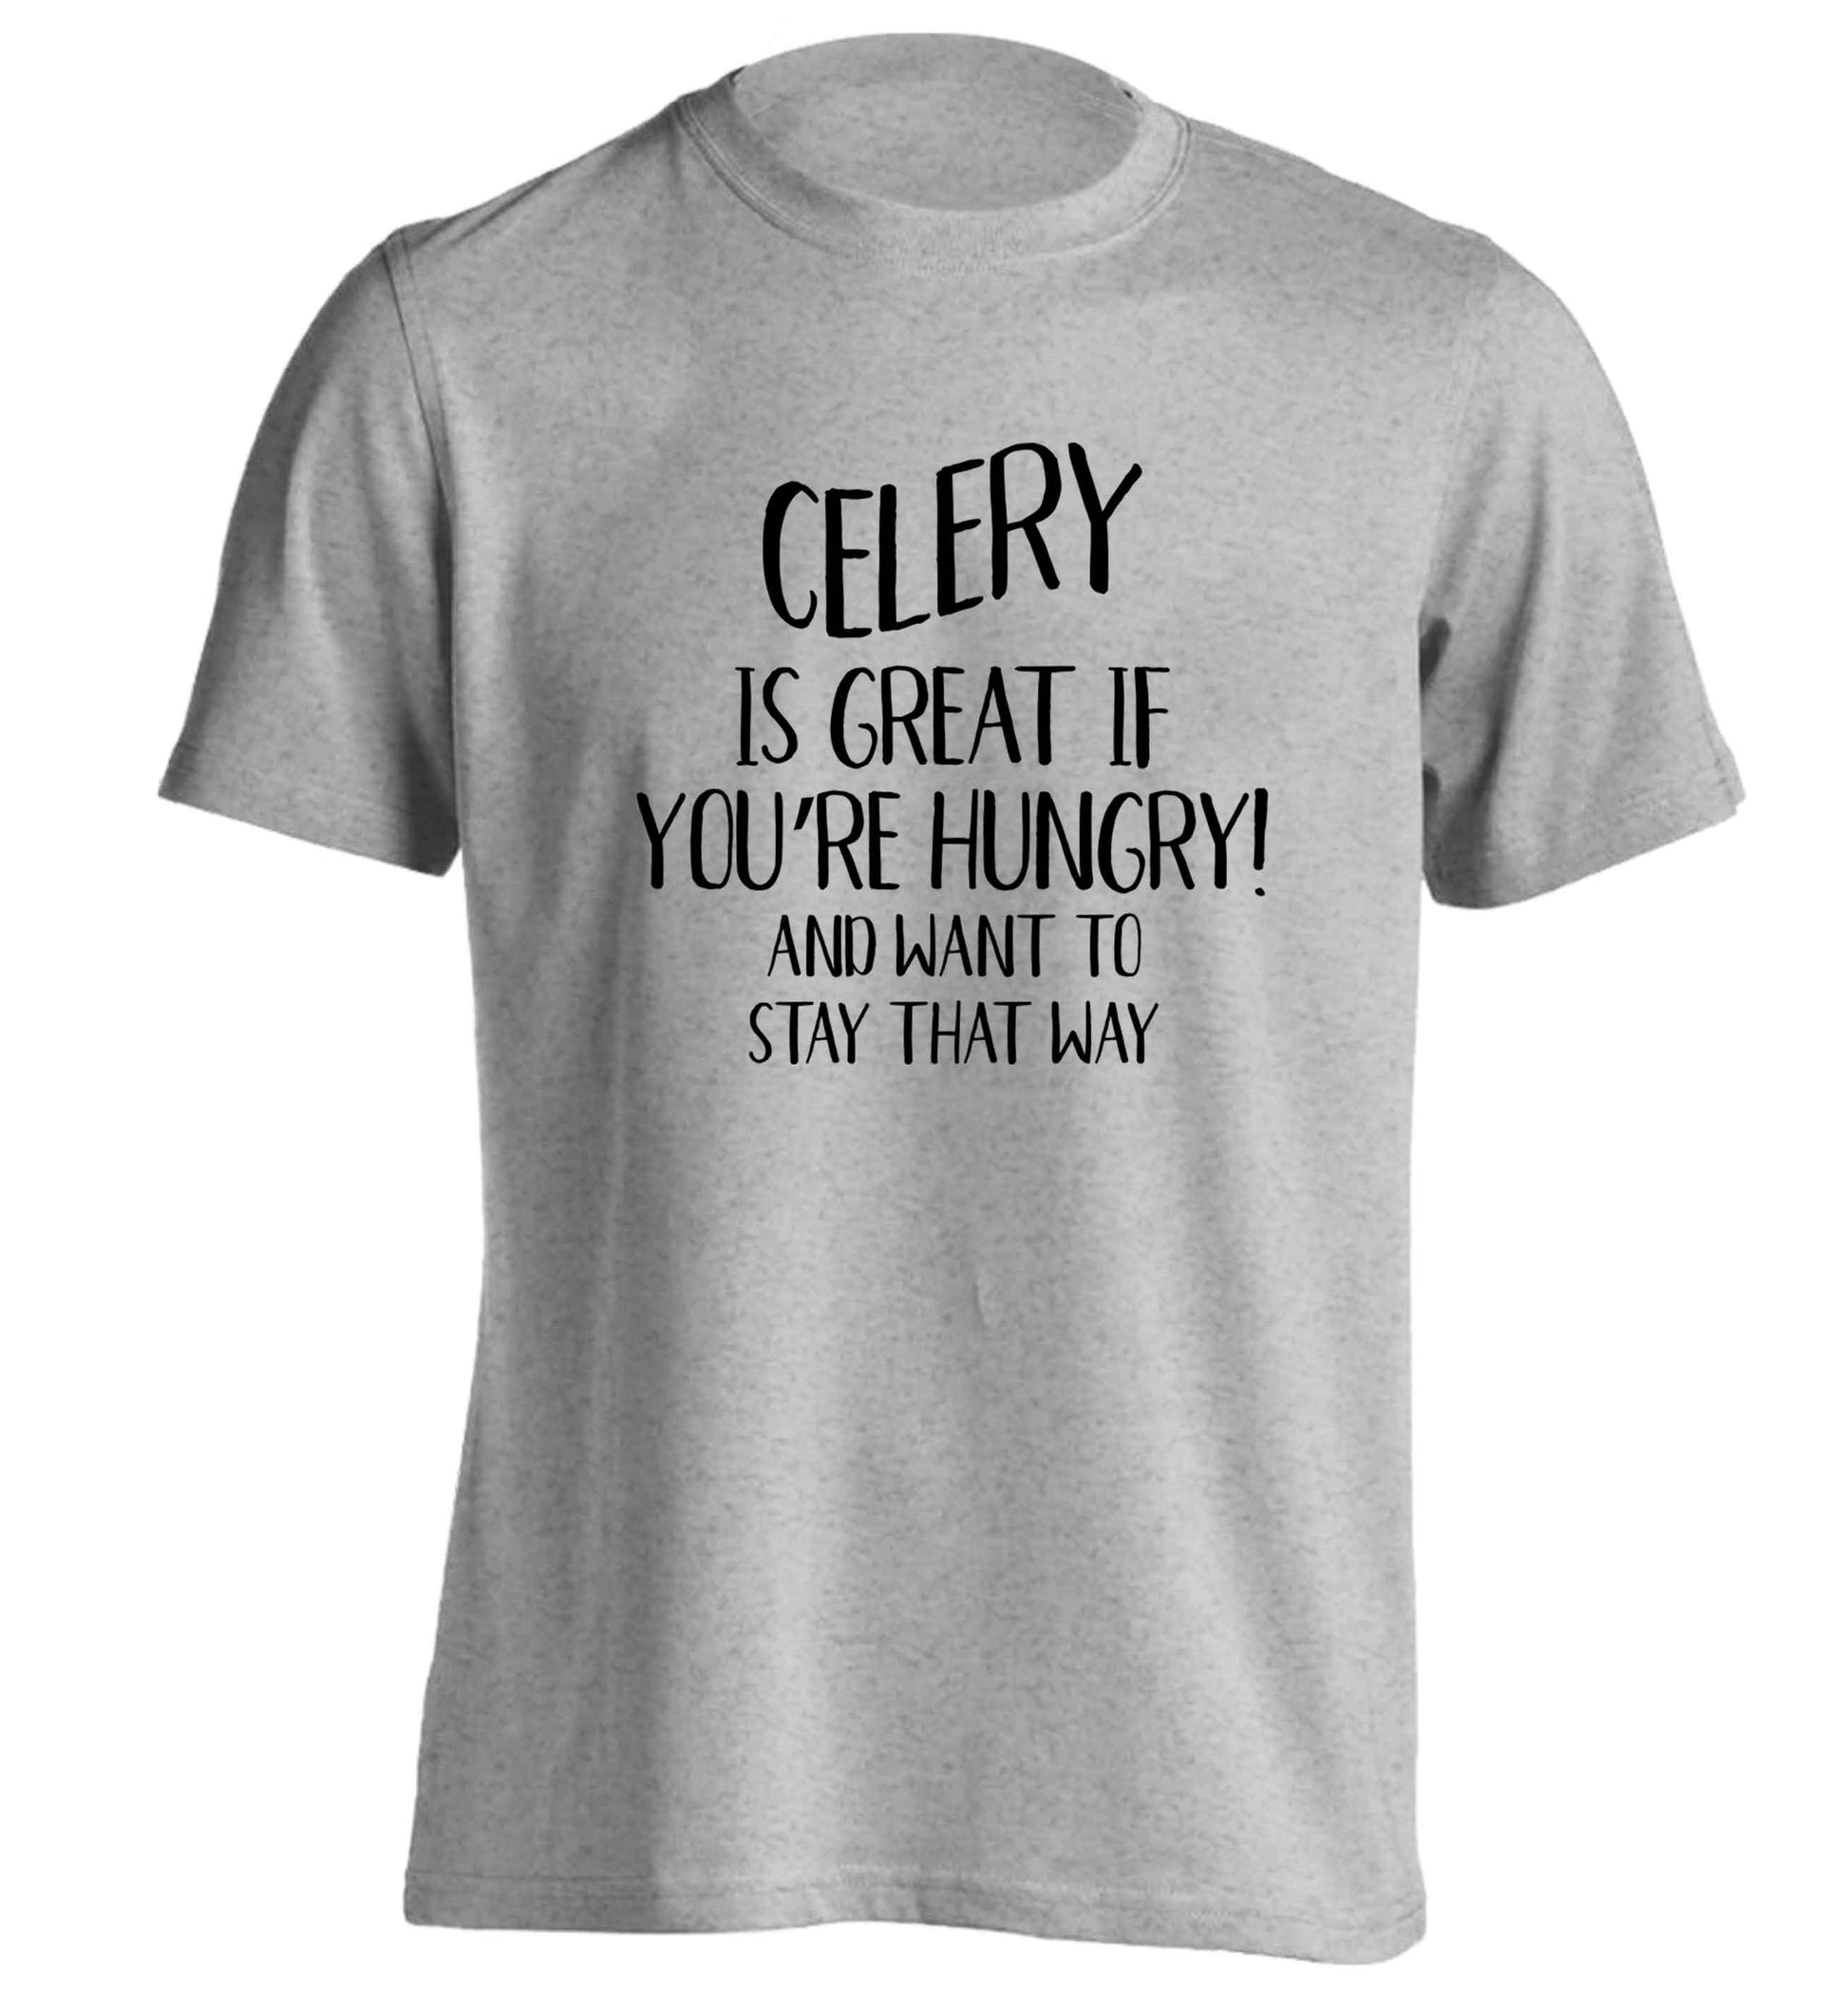 Cellery is great when you're hungry and want to stay that way adults unisex grey Tshirt 2XL